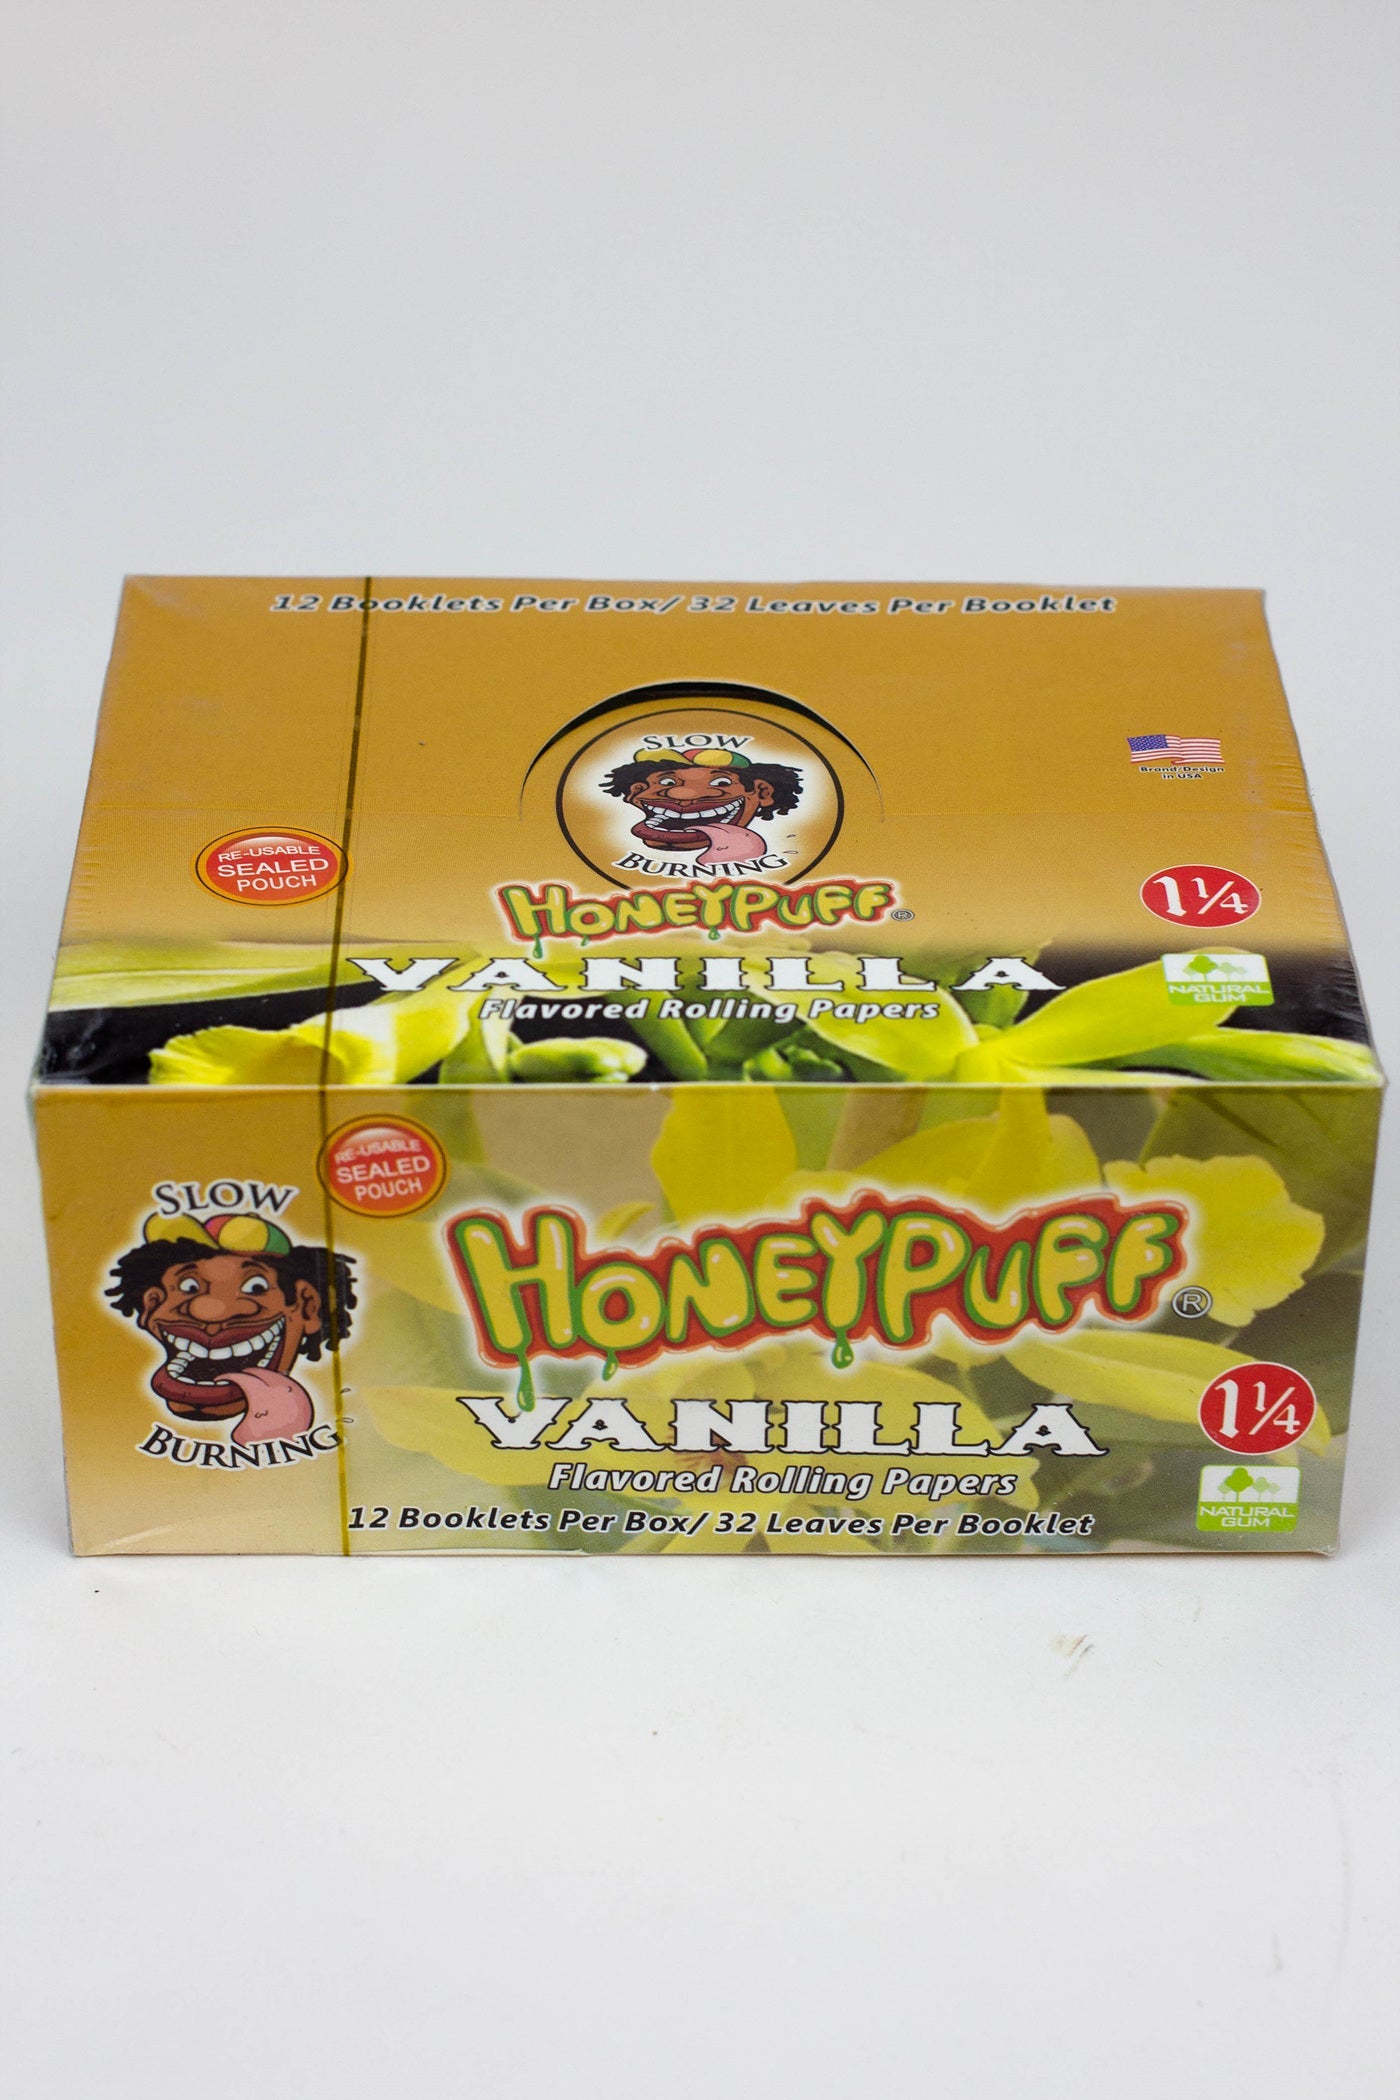 HONEYPUFF 1 1/4 FRUIT FLAVORED ROLLING PAPERS_10